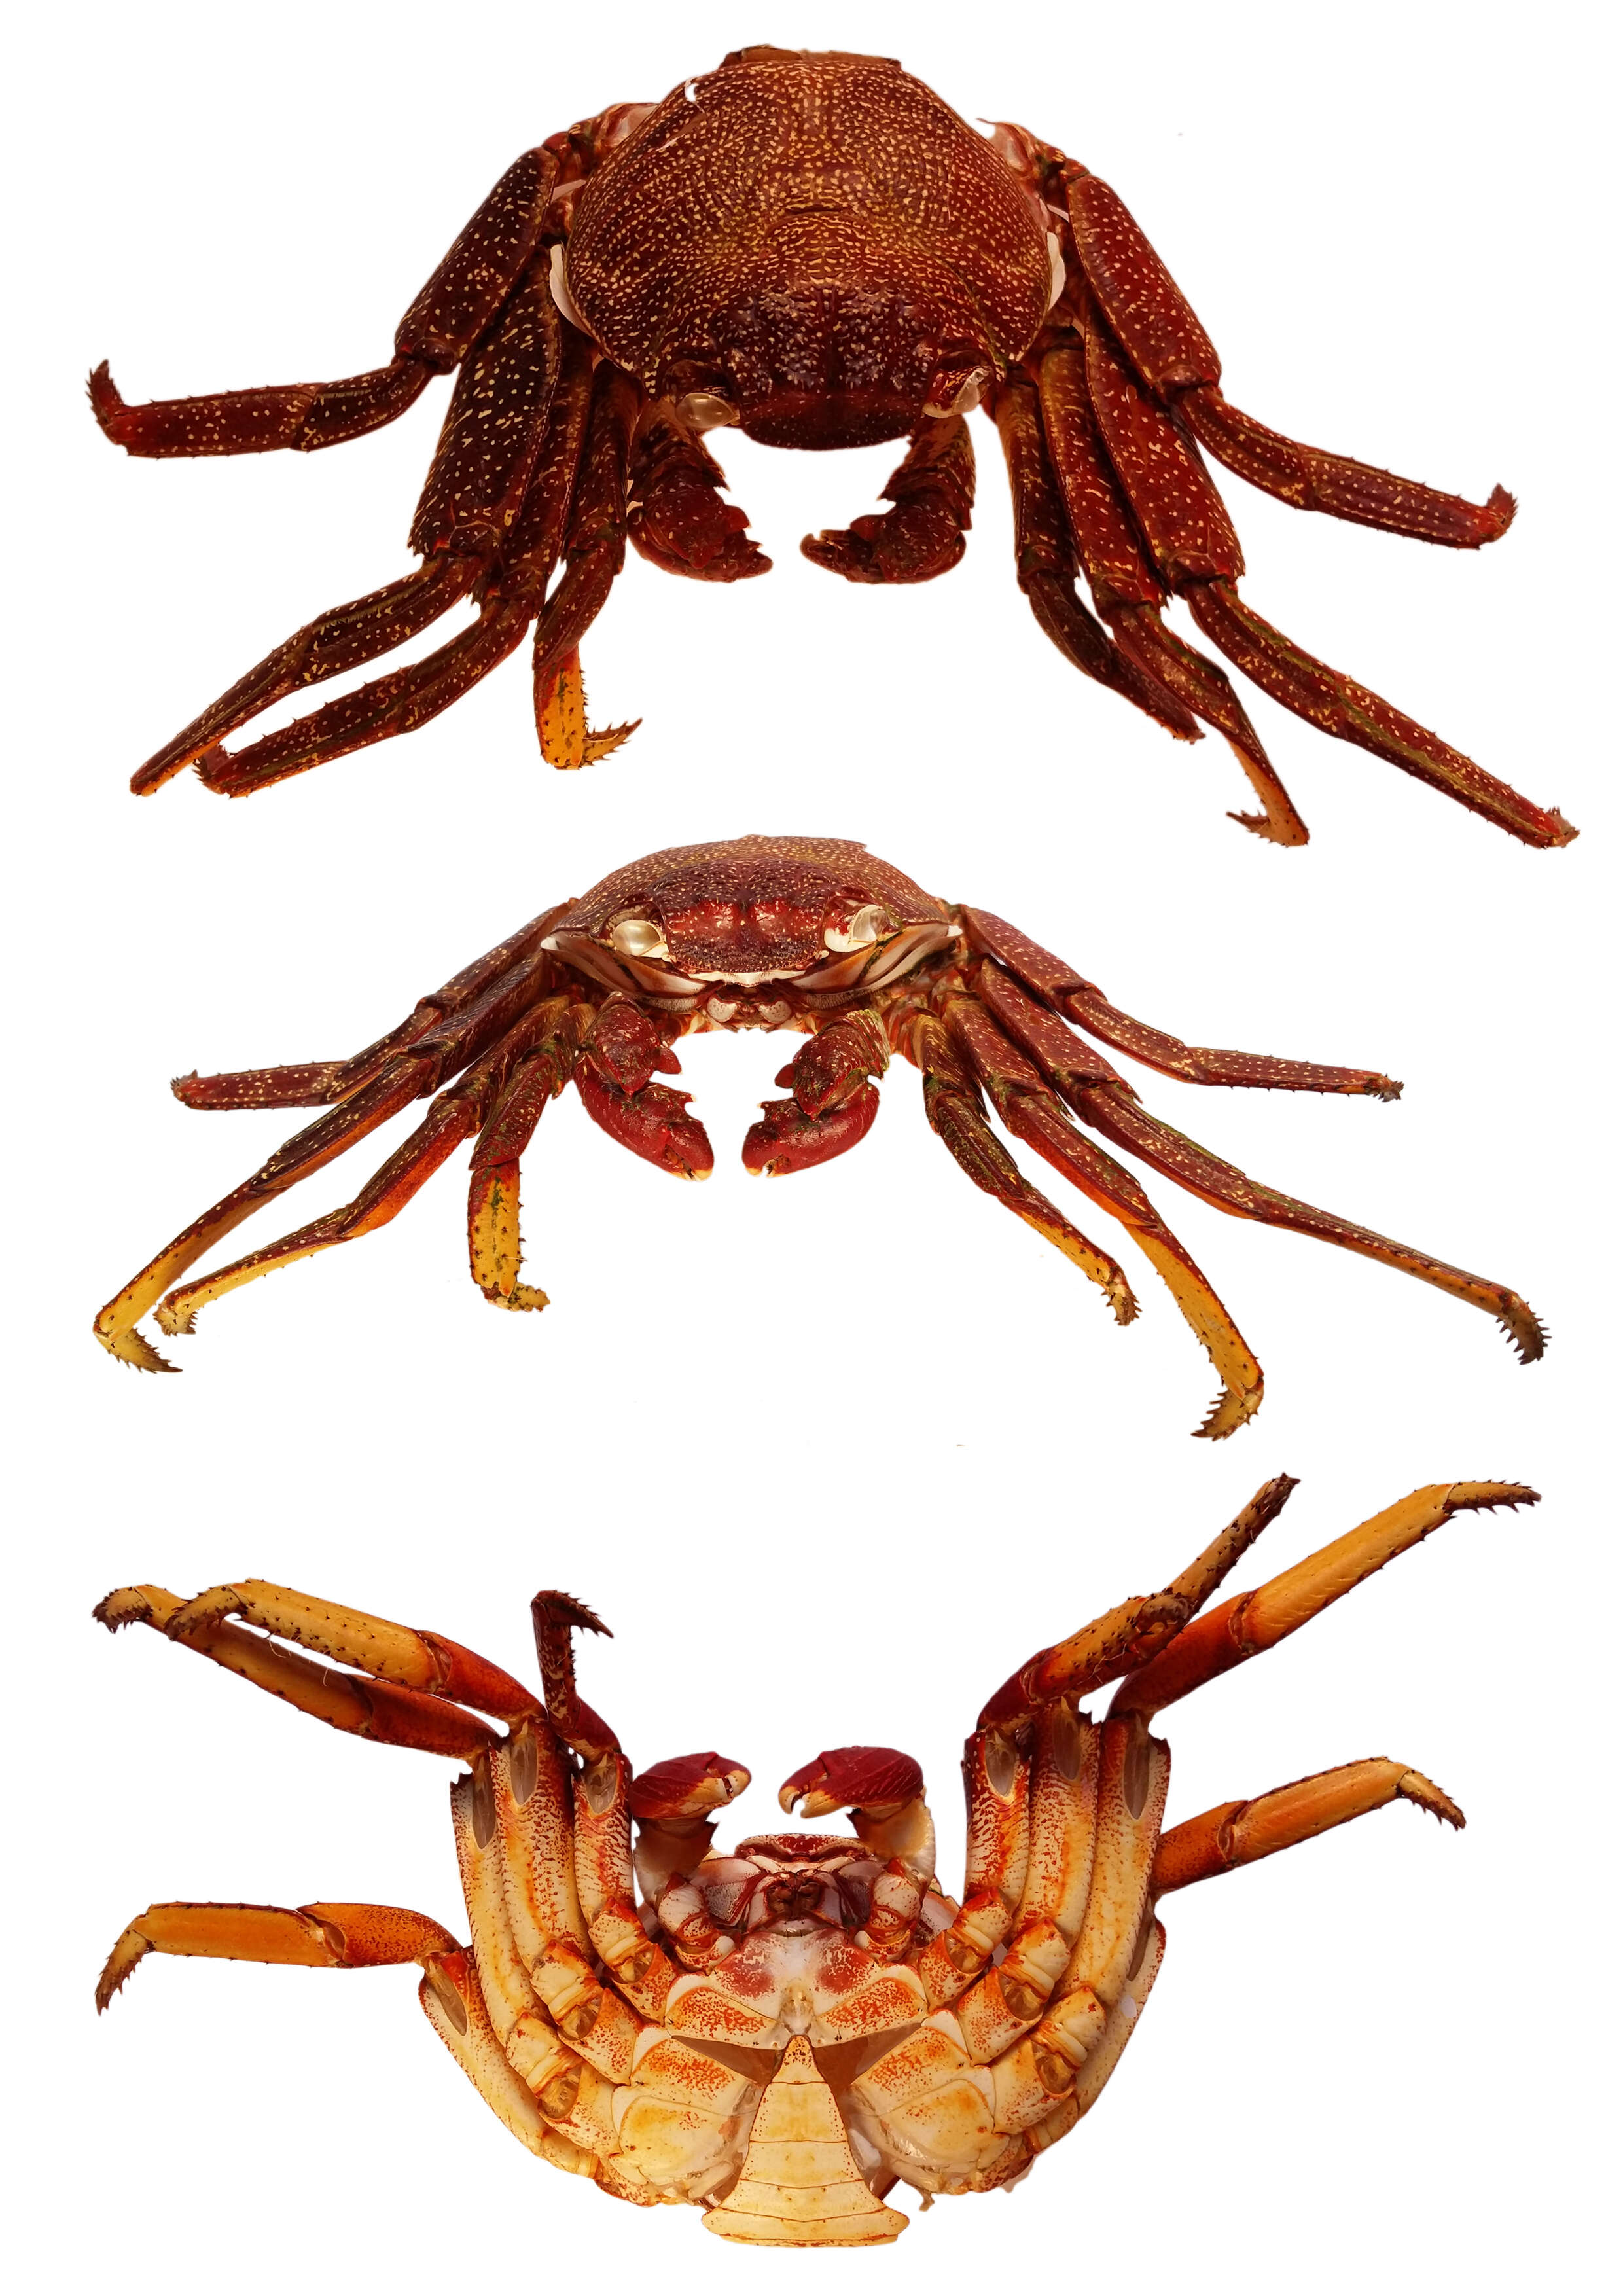 Image of Grapsus adscensionis (Osbeck 1765)